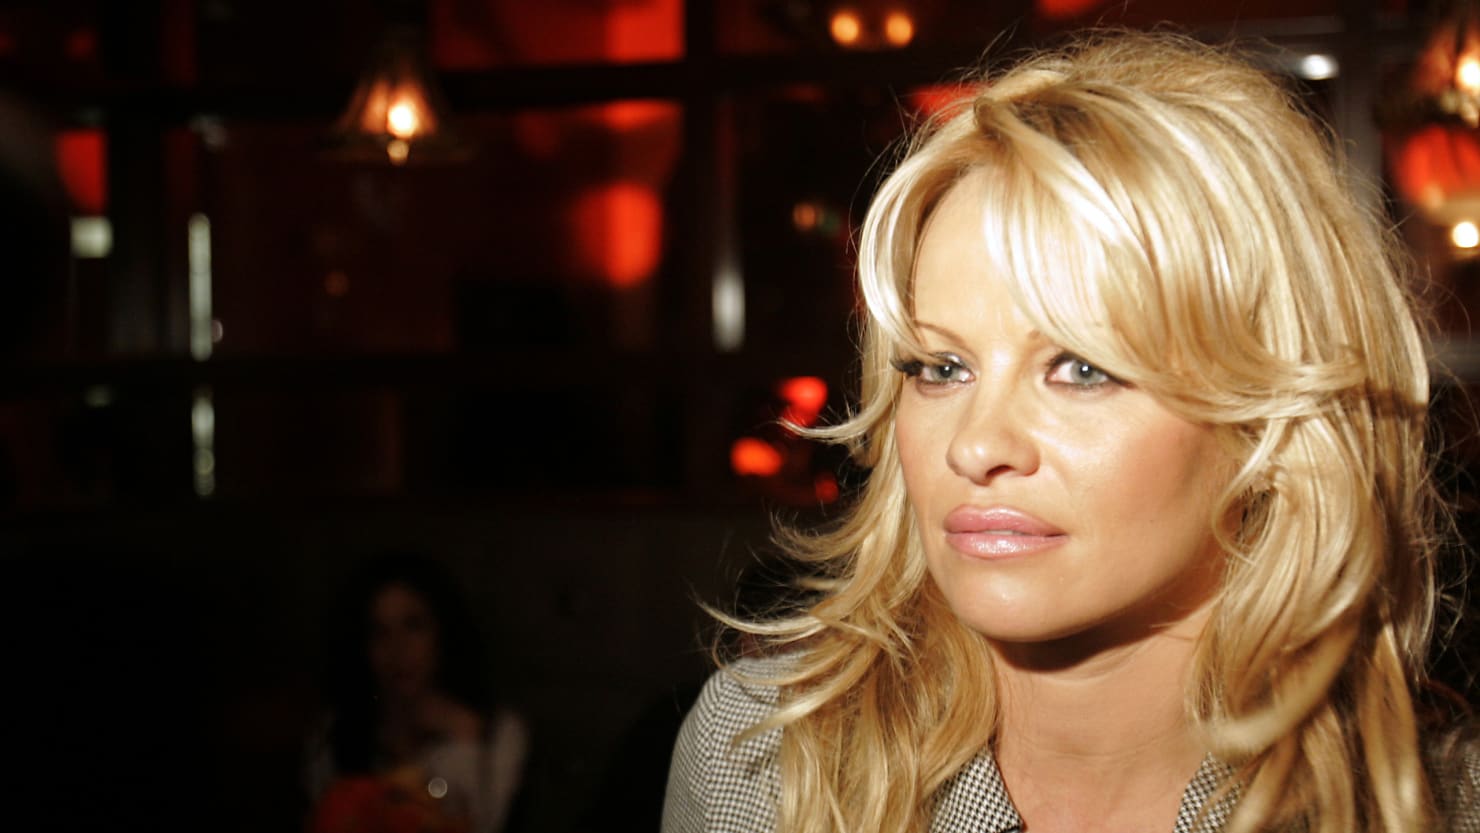 Ashley Anderson Forced - Pamela Anderson Shatters the 'Good' Rape Myth